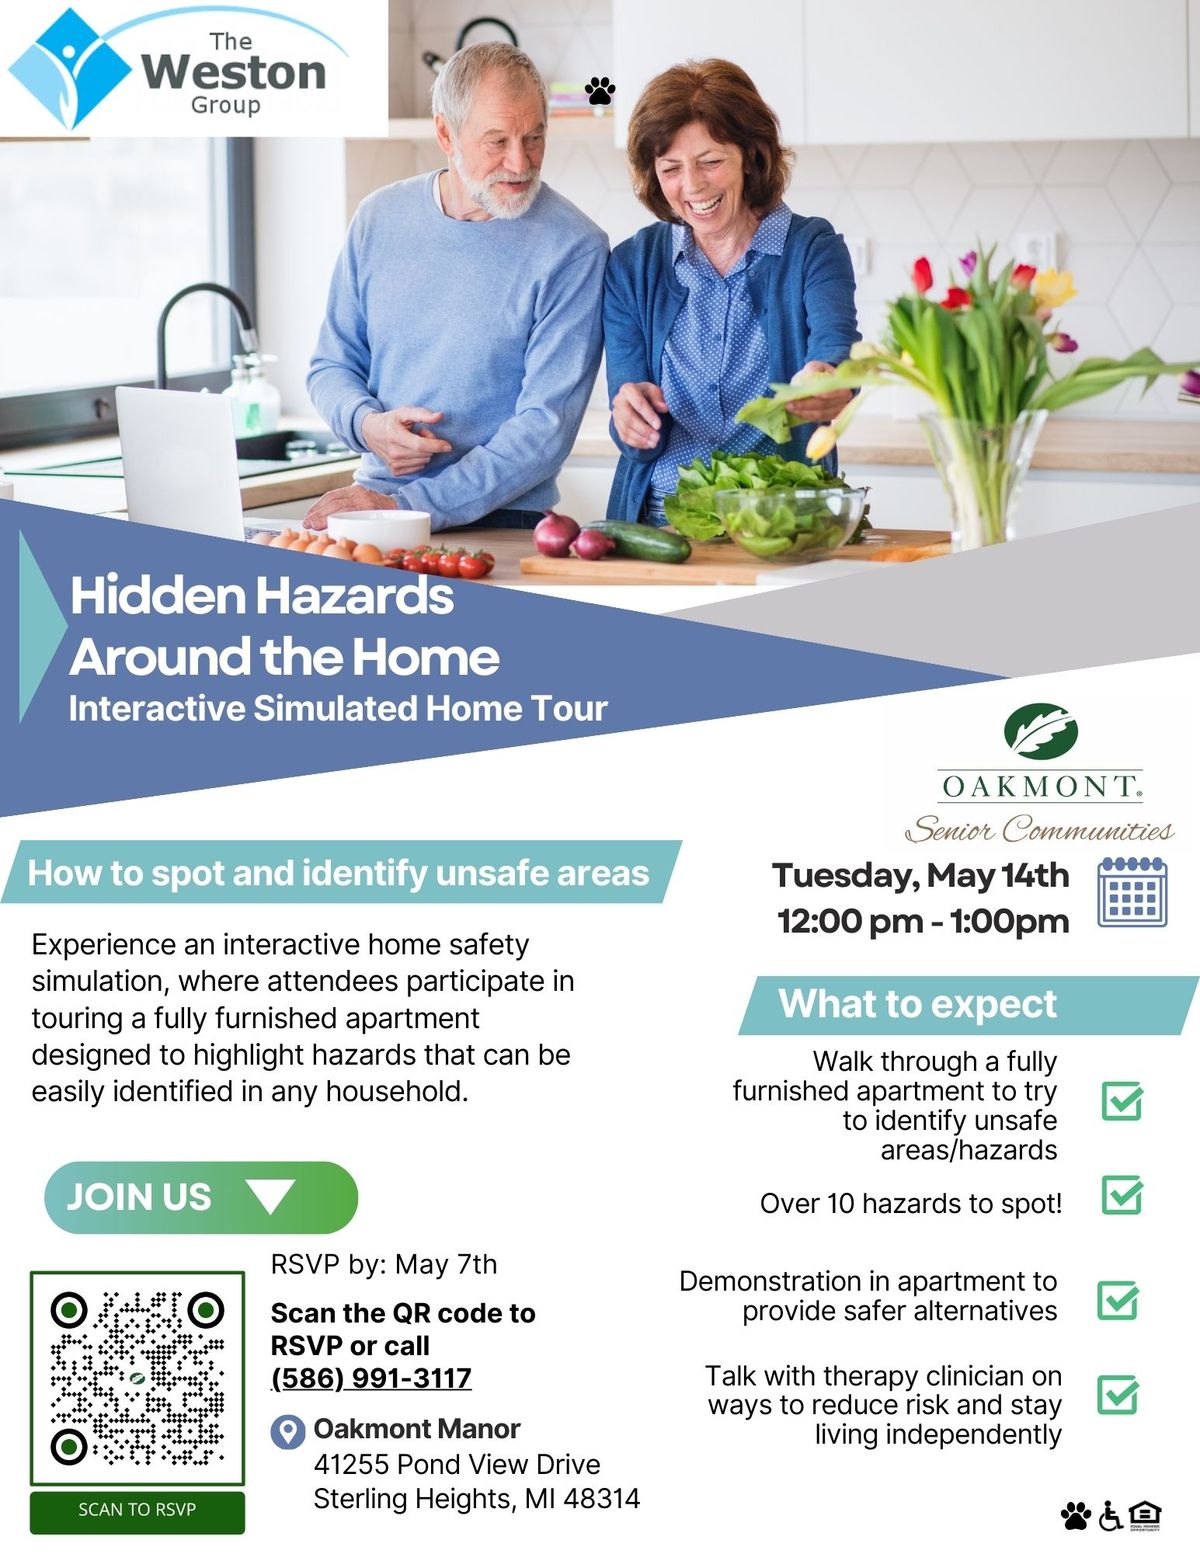 Hidden Hazards Around the Home: Interactive Simulated Home Tour 